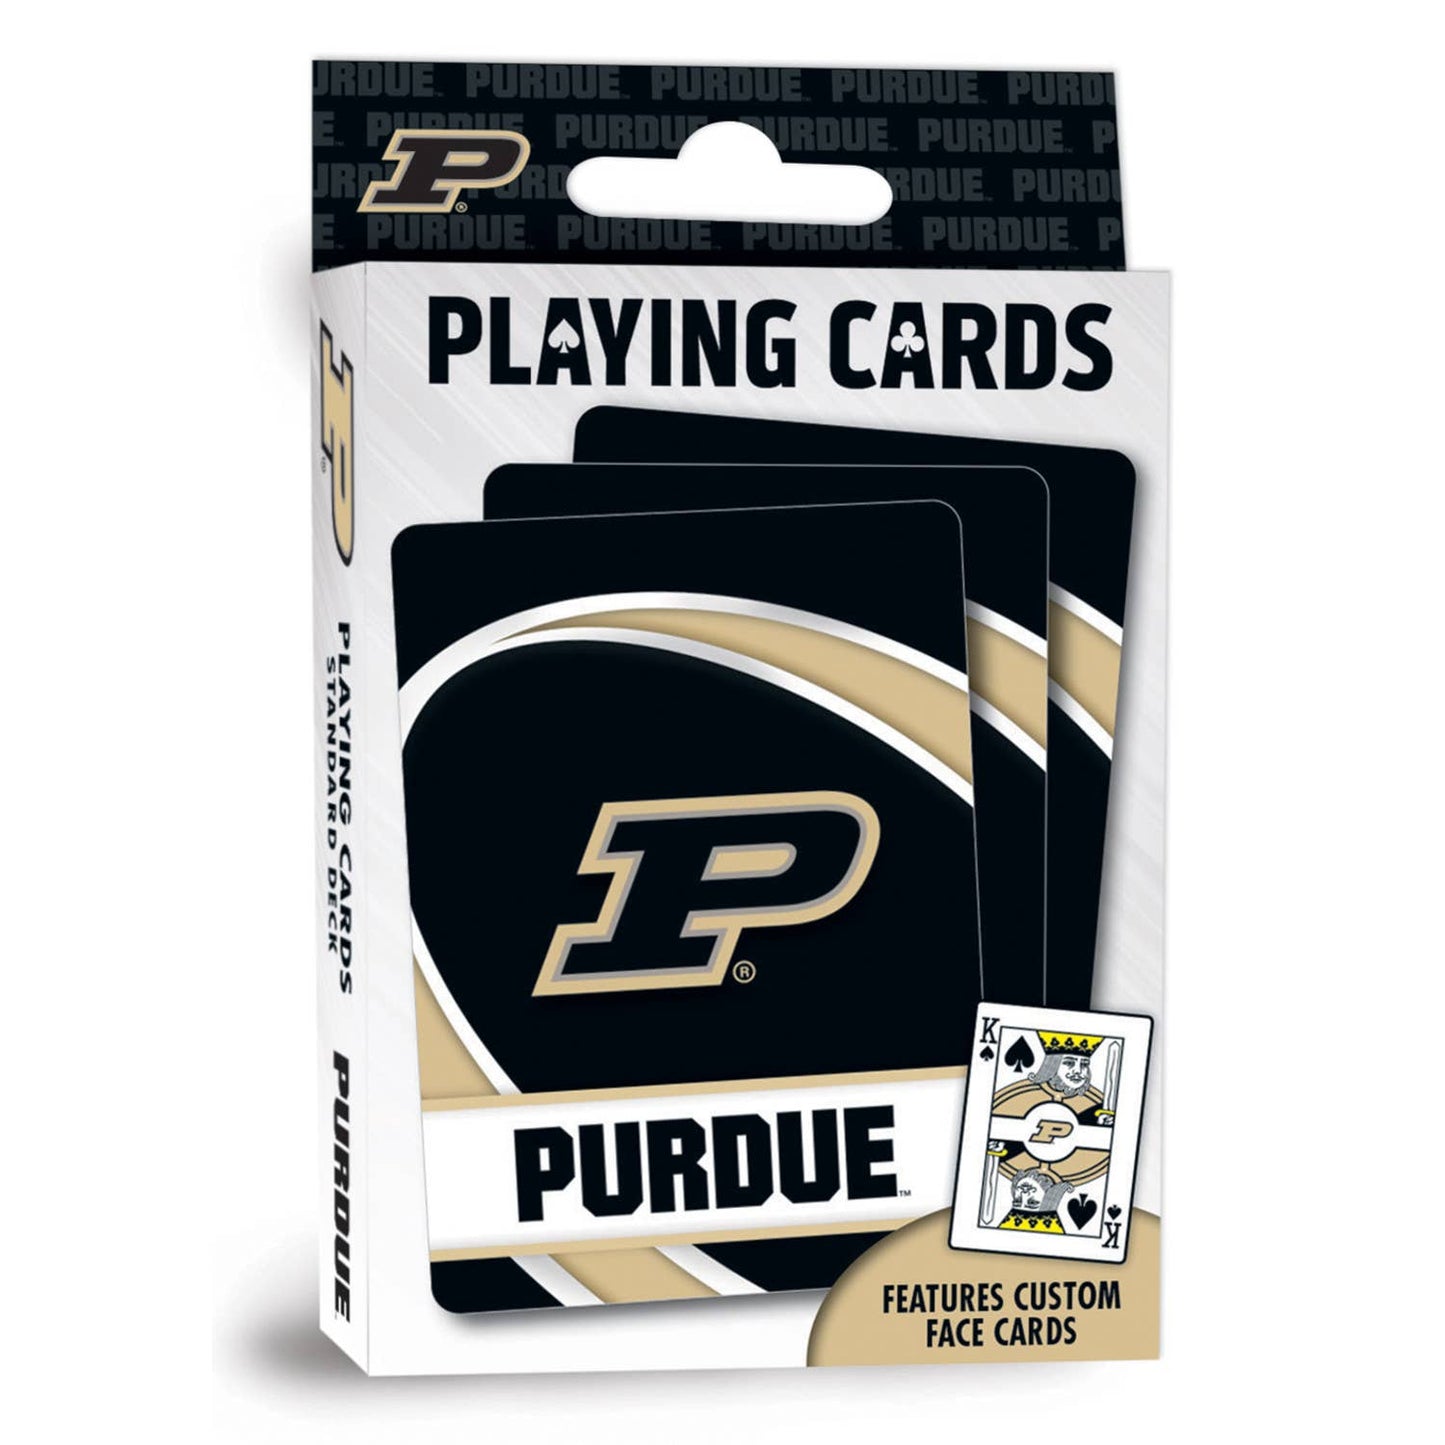 Purdue Boilermakers Playing Cards